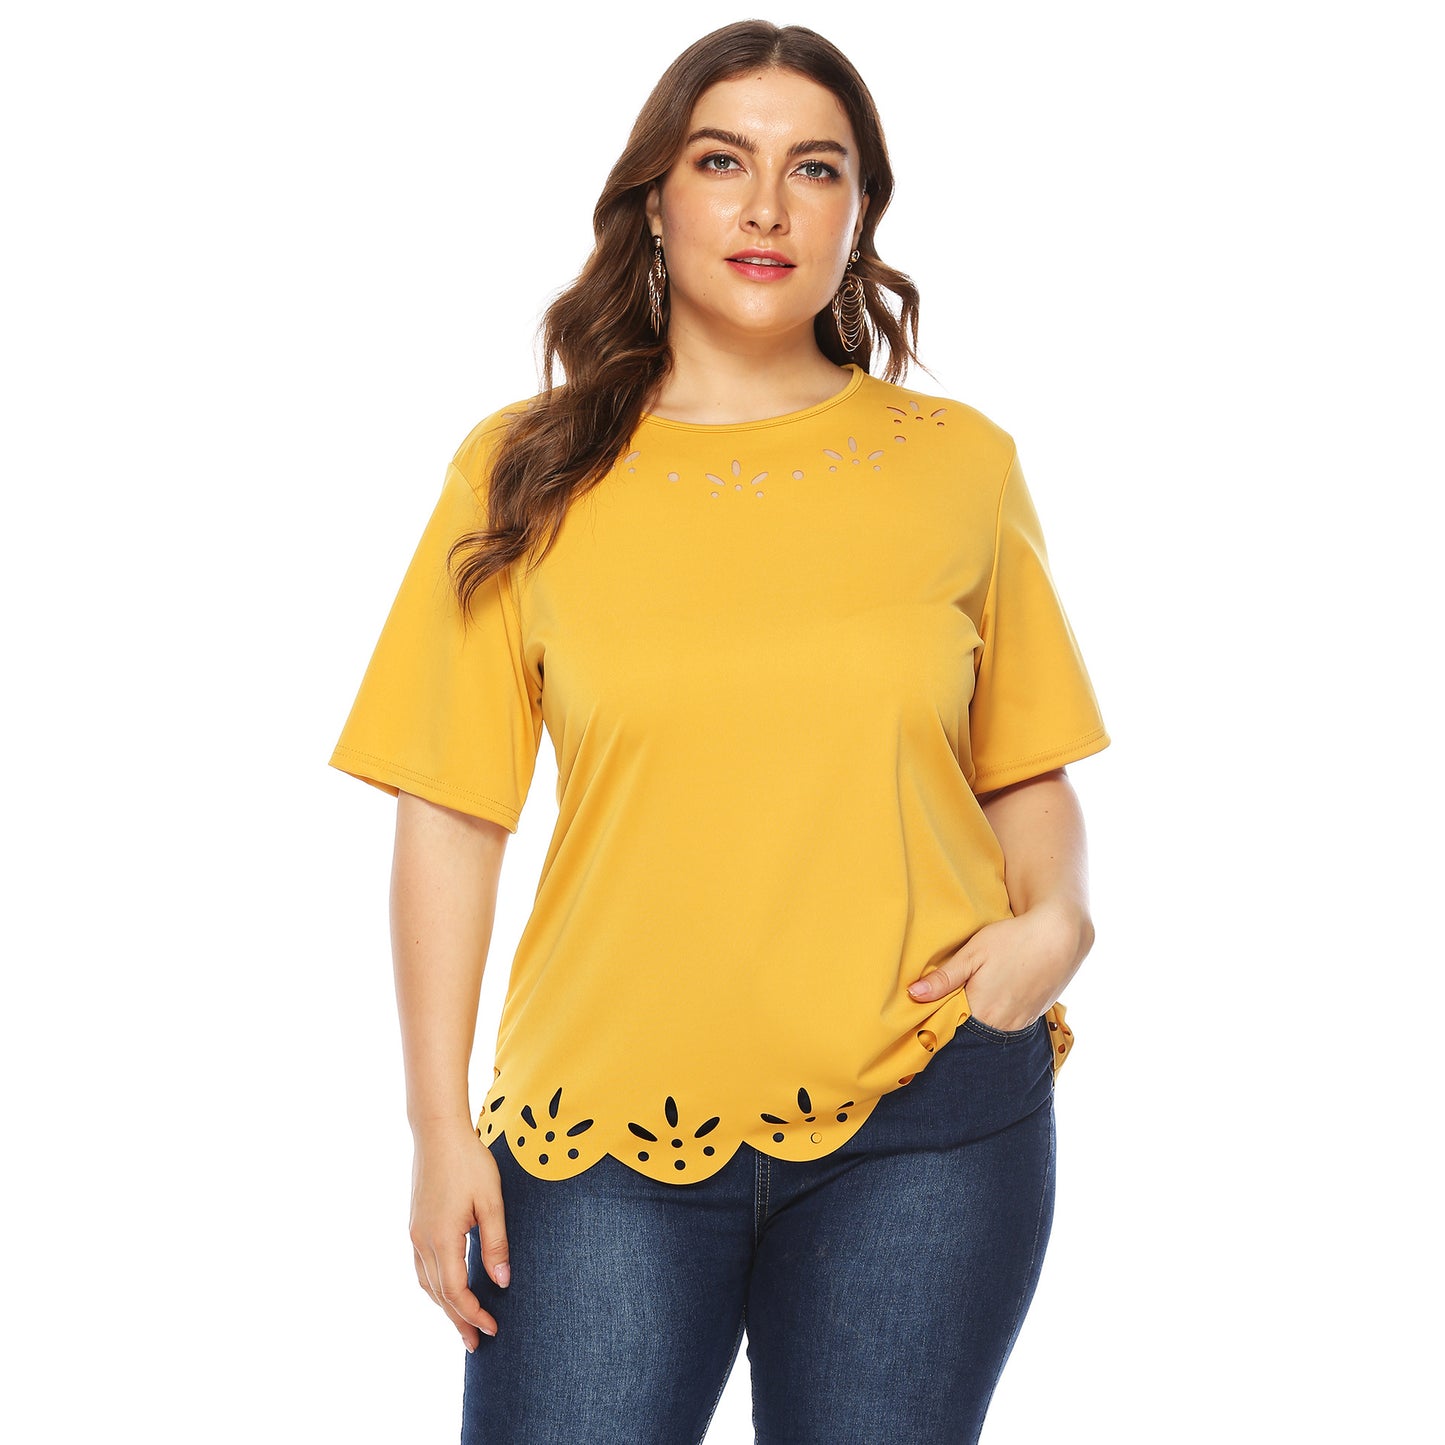 Plus Size Plus Size Women round Neck Short Sleeved Casual T-shirt Hollow out Burnt-out Solid Color Casual Top Female